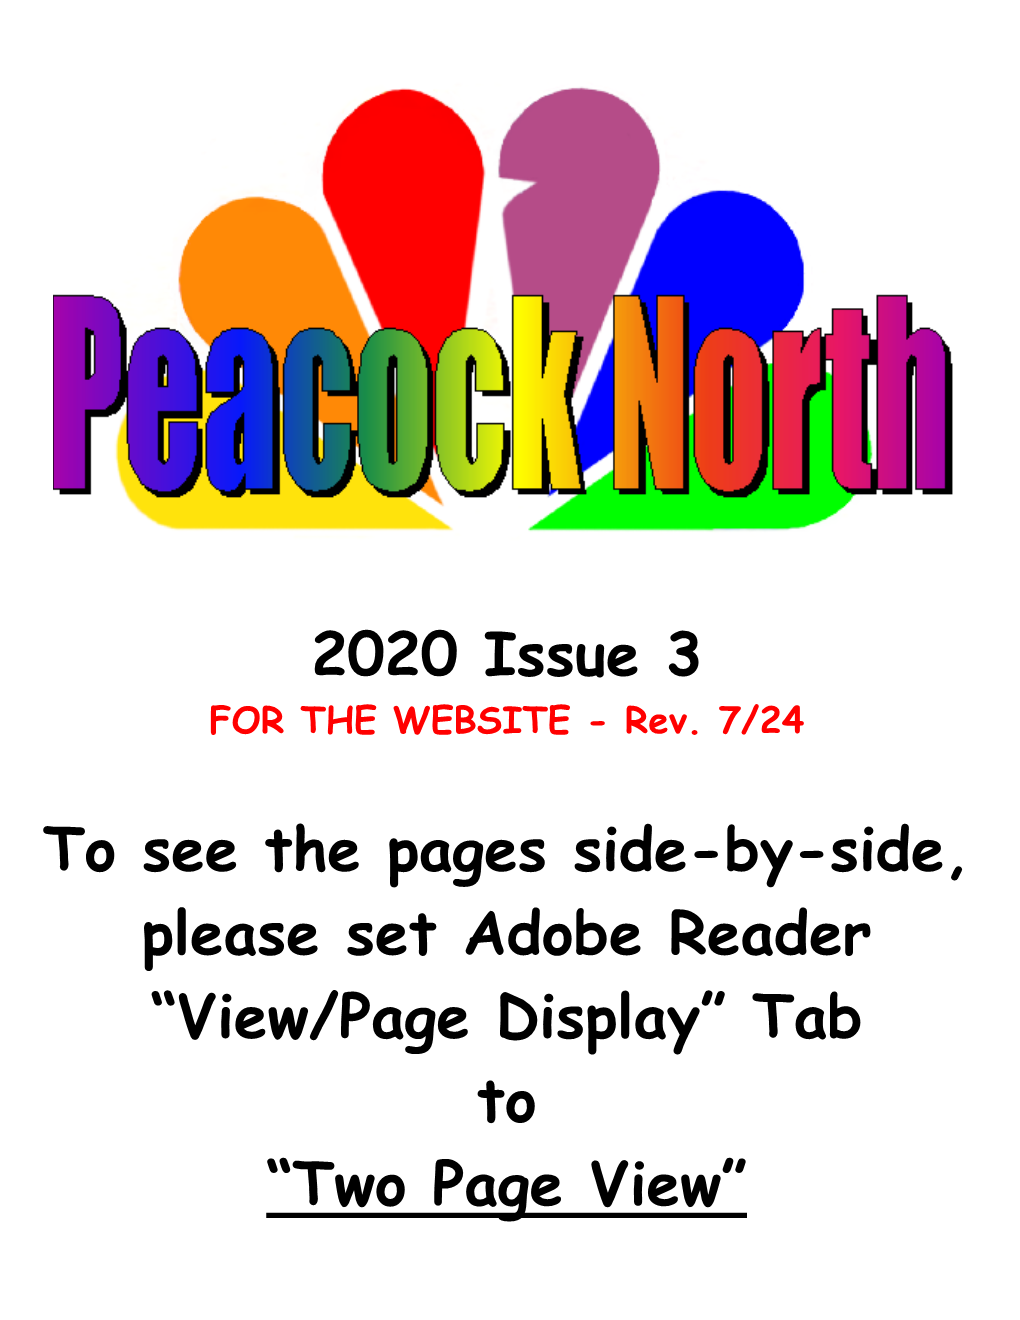 2020 Issue 3 to See the Pages Side-By-Side